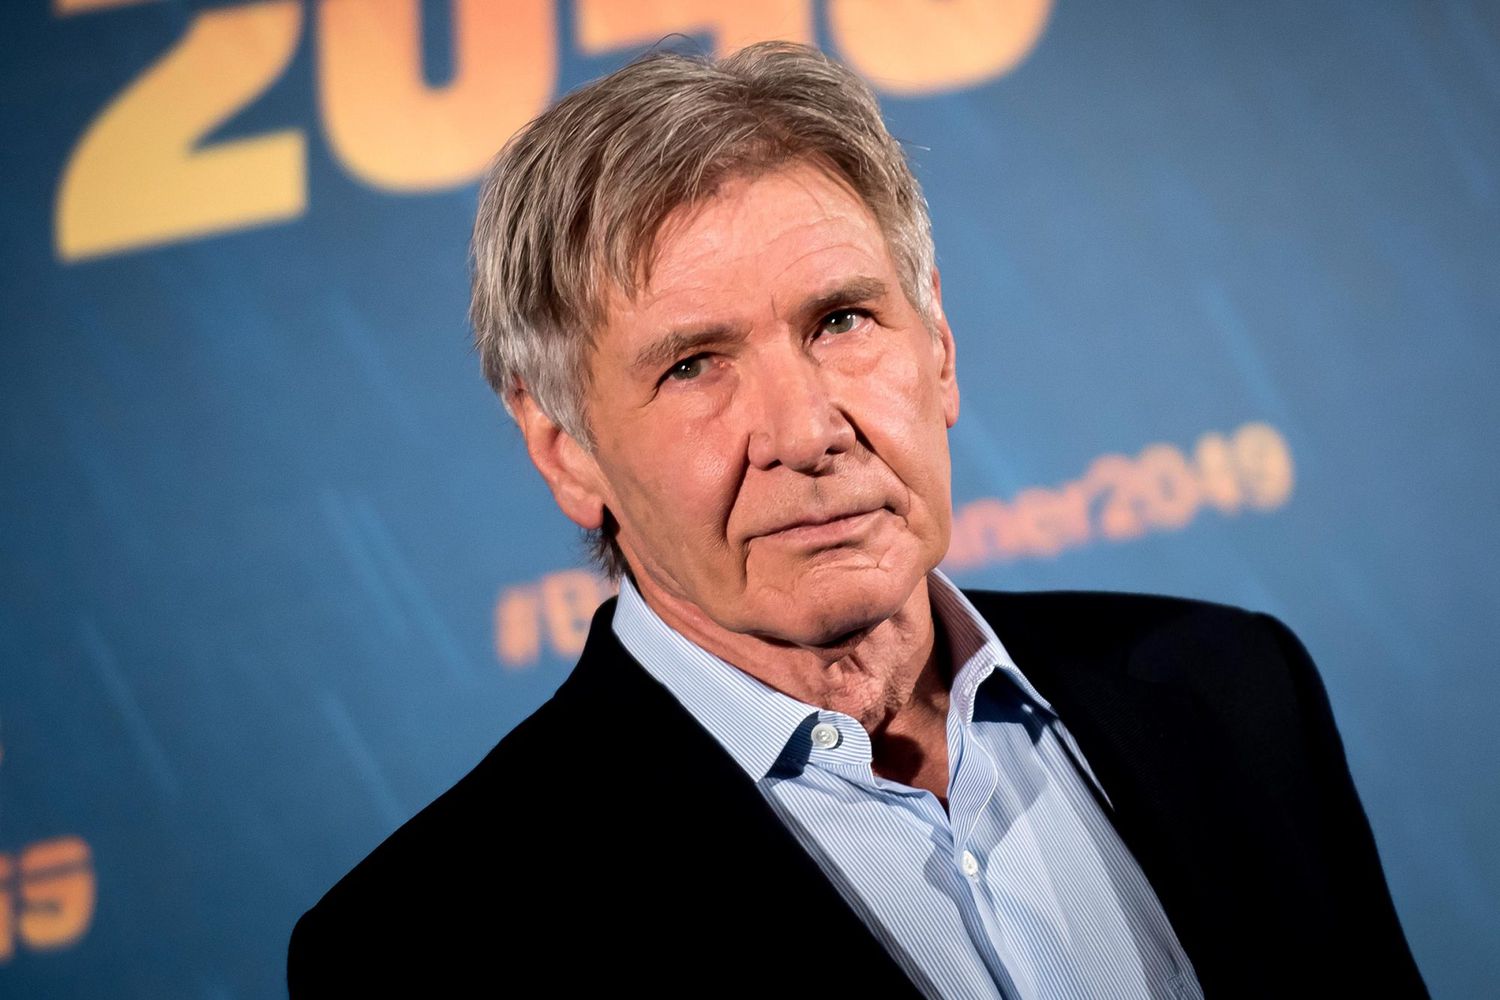 Rumors of Harrison Ford’s Divorce From Calista Flockhart: Is It True?